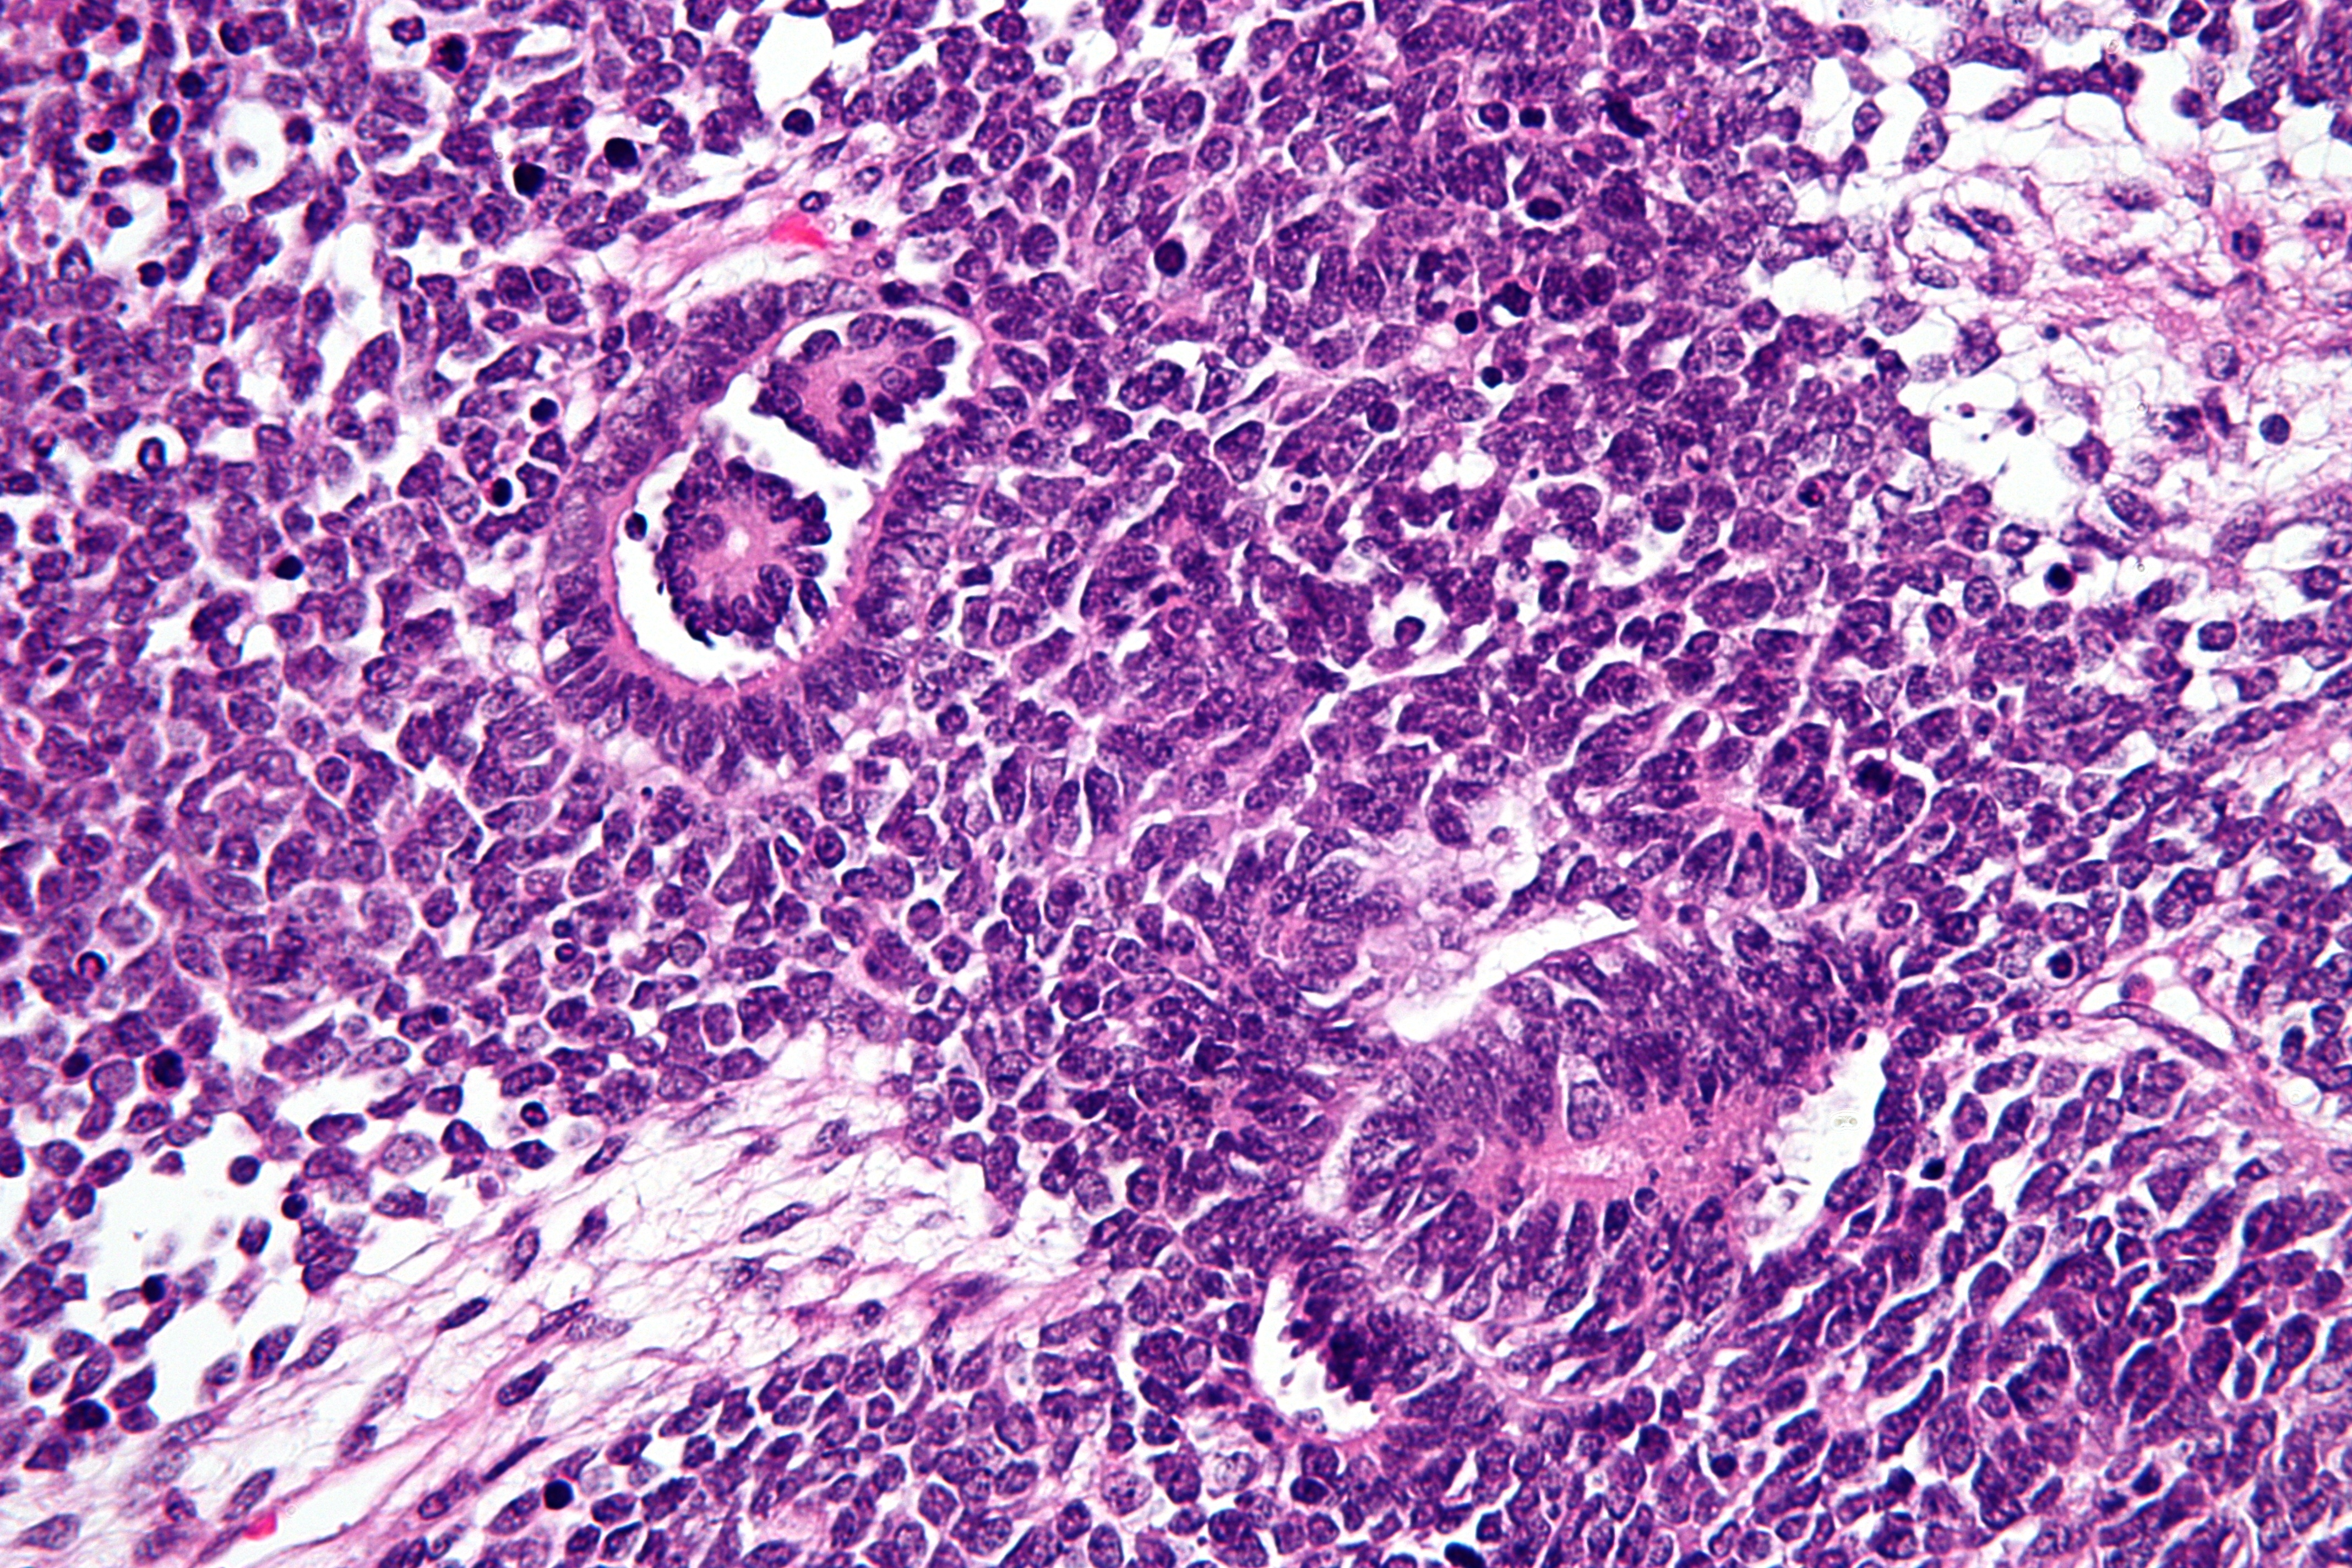 File:Wilms tumour - very high mag.jpg